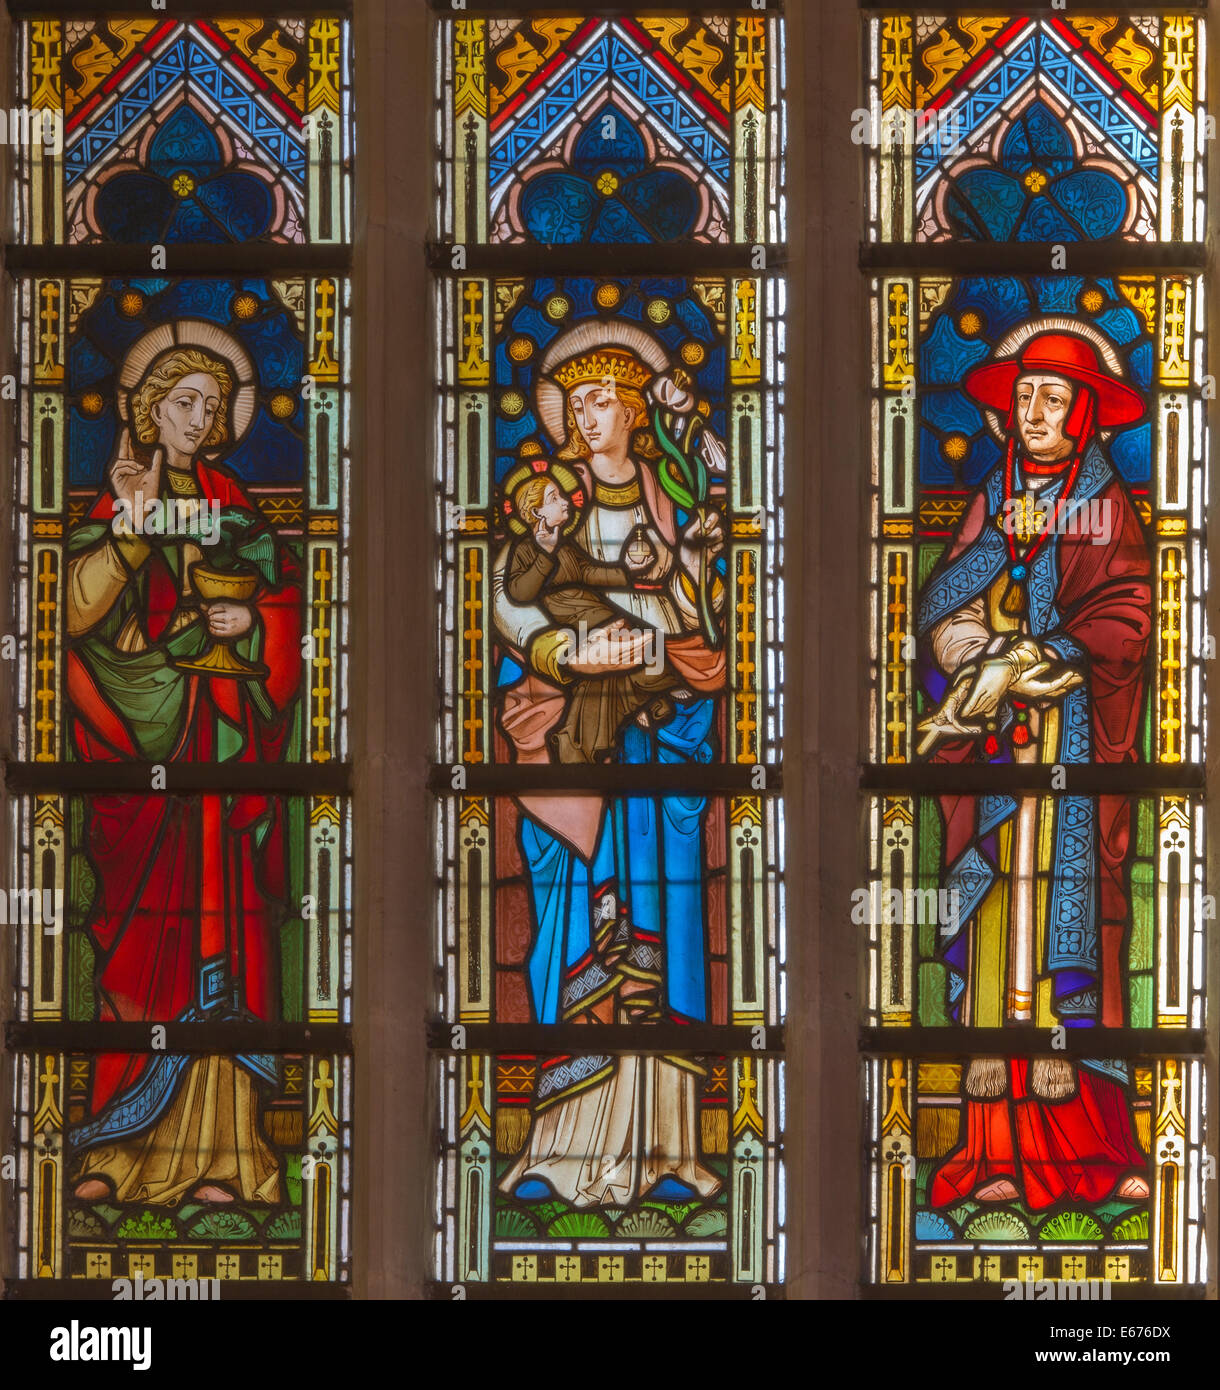 BRUGES, BELGIUM - JUNE 13, 2014: Madonna with the saints on the windowpane in st. Giles church (Sint Gilliskerk) Stock Photo